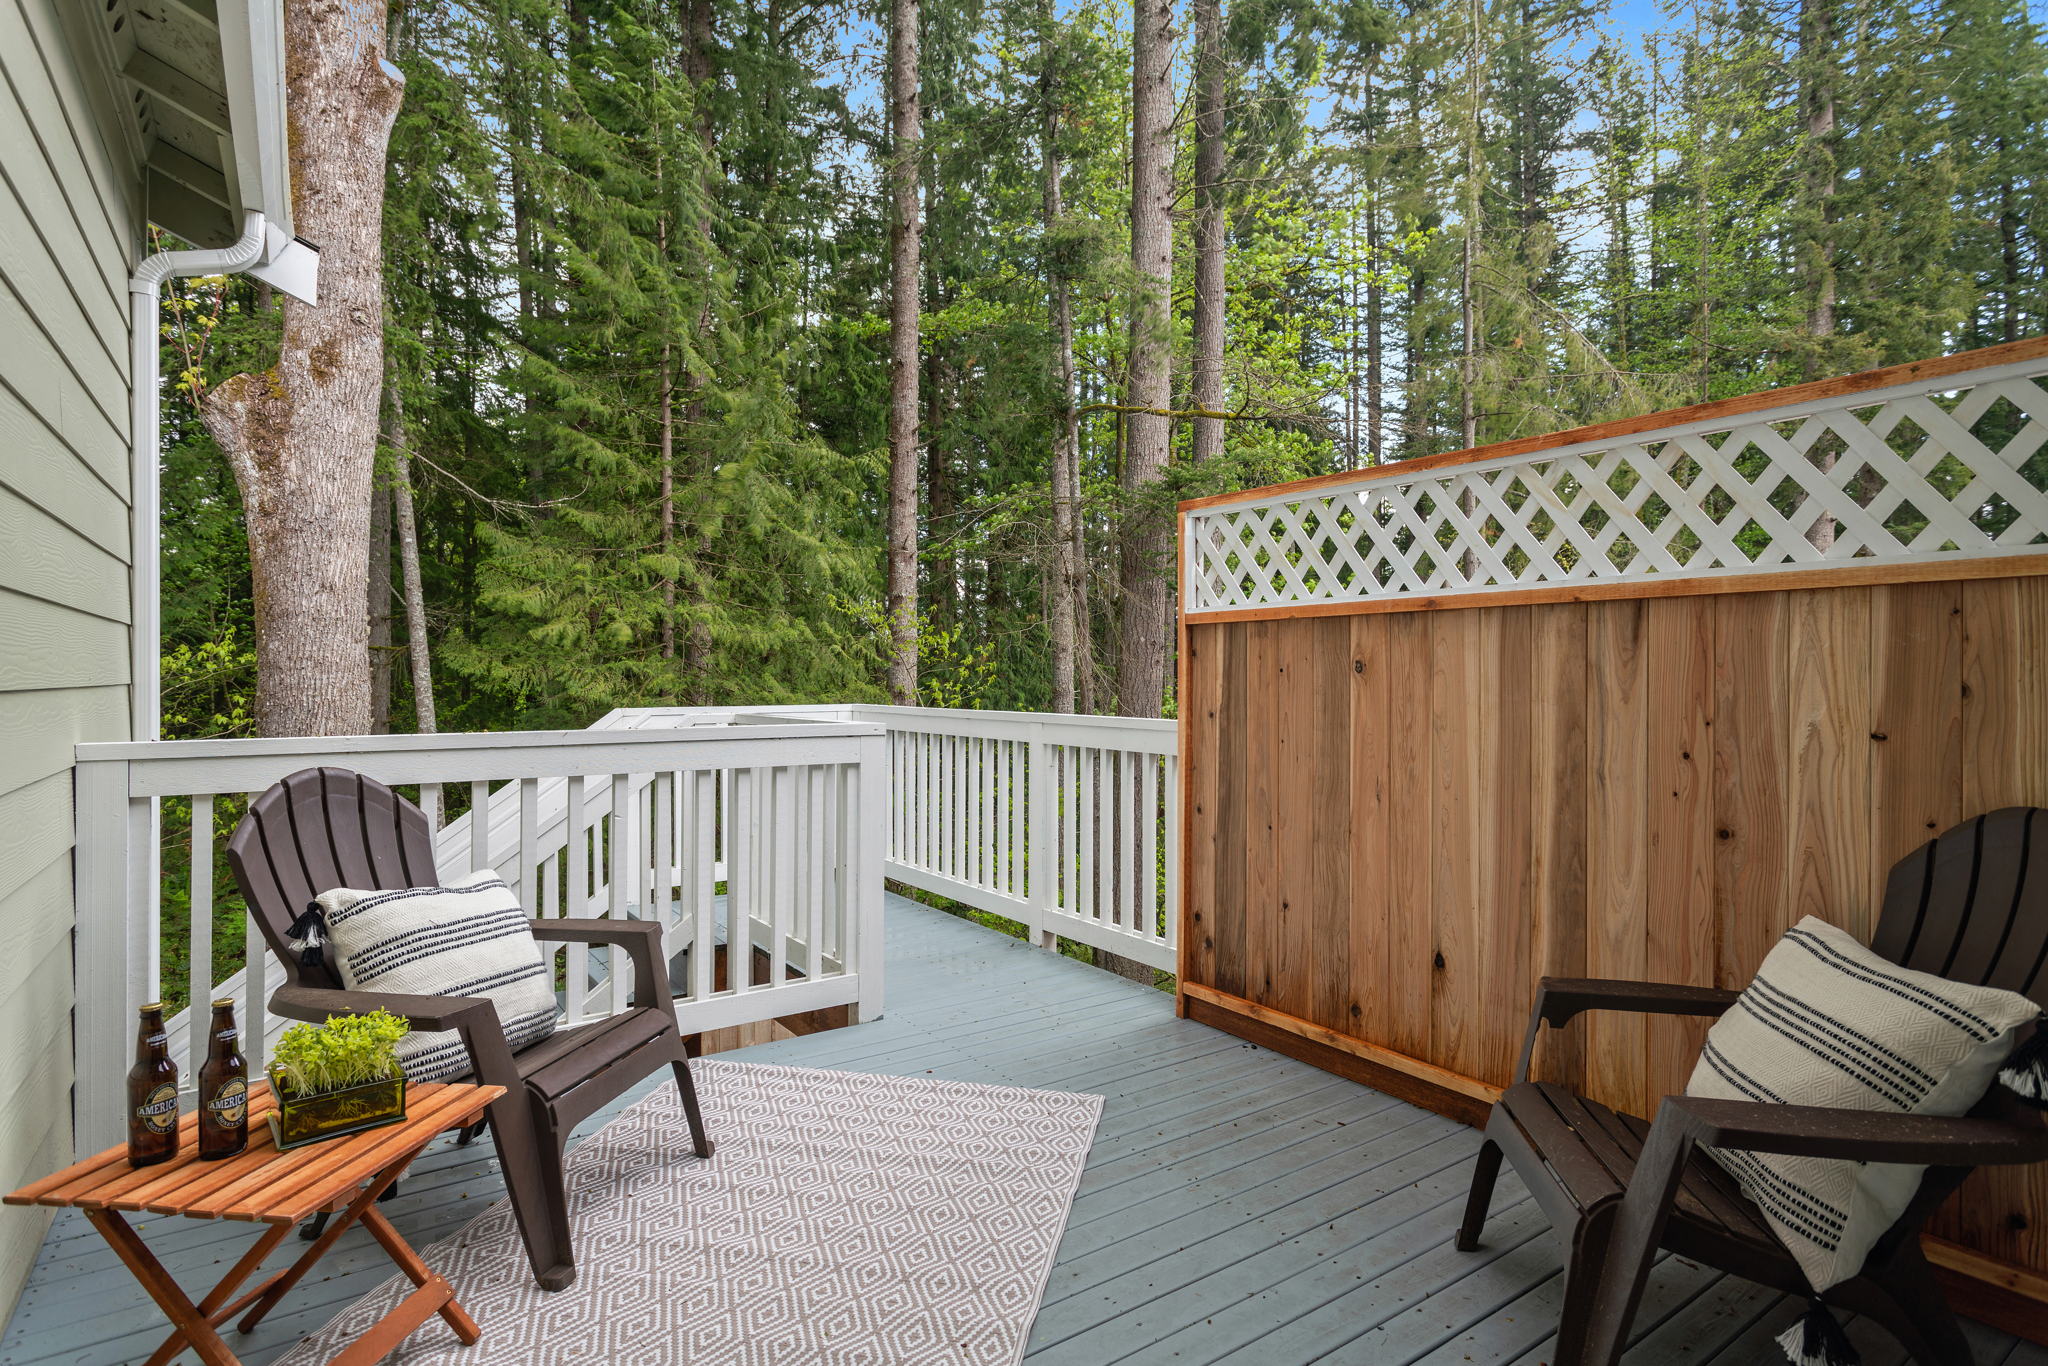 Great deck for hanging out, set up your BBQ or fire pit and enjoy your secluded backyard